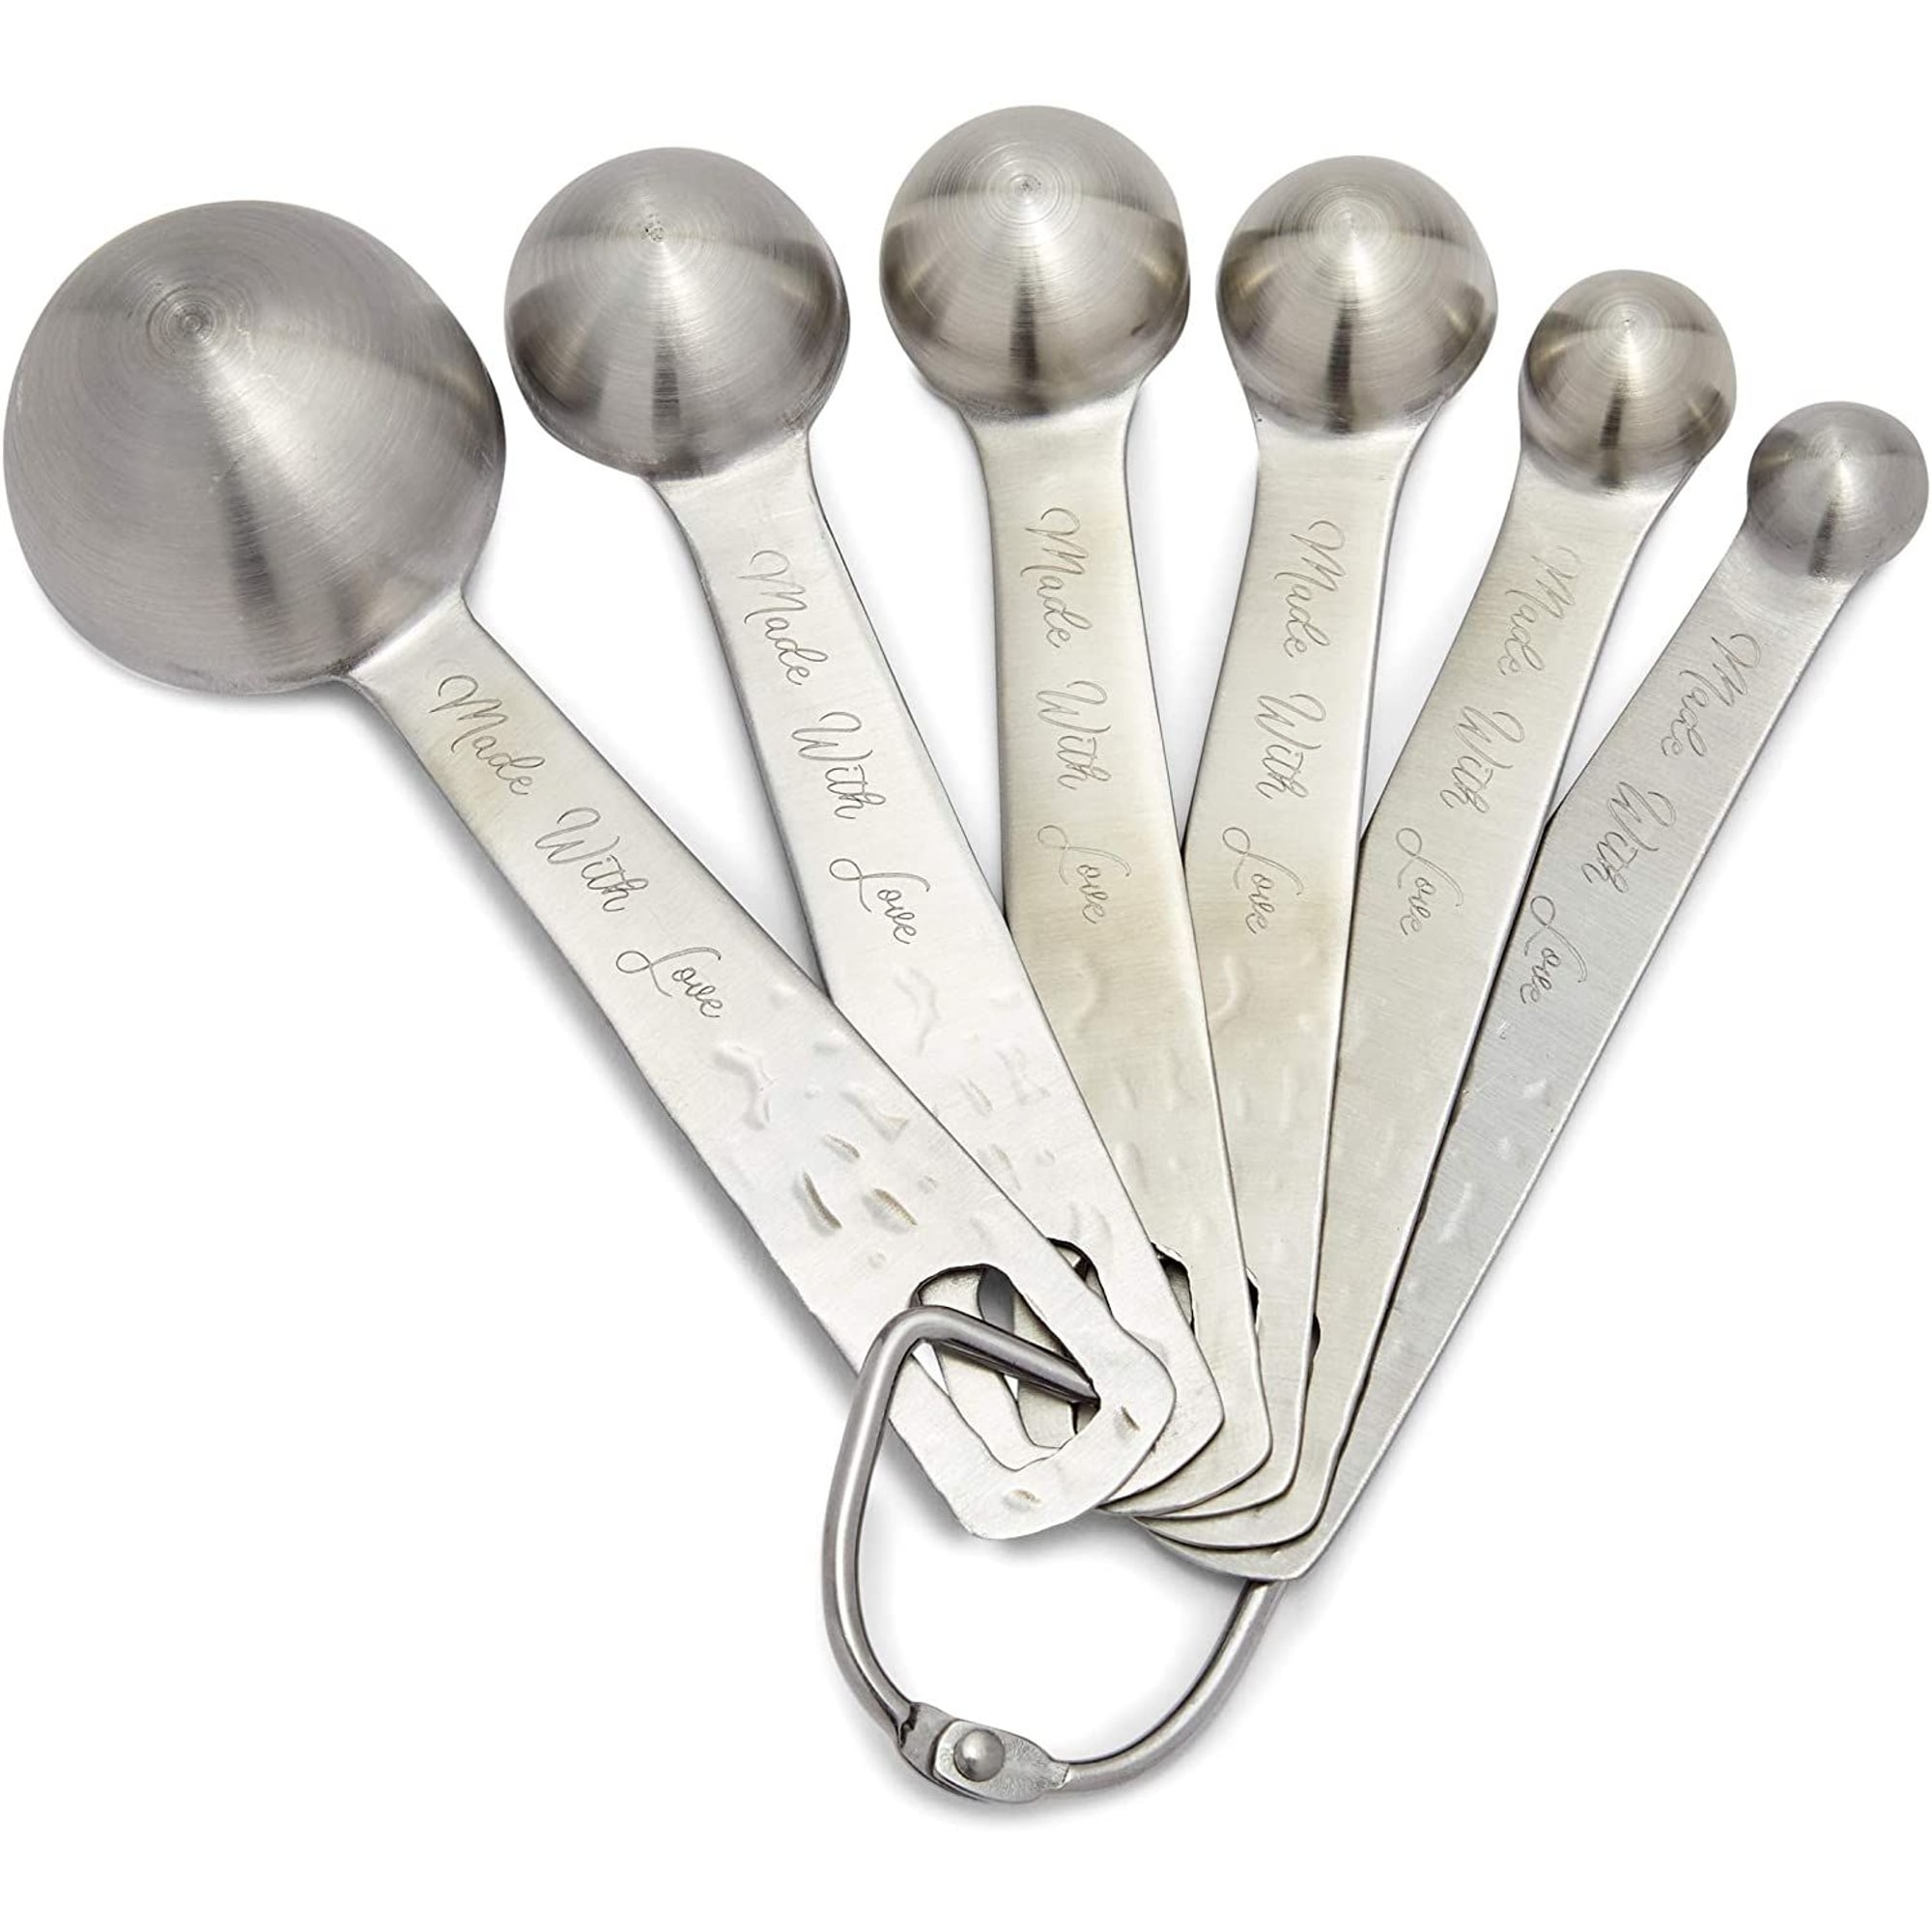 https://ak1.ostkcdn.com/images/products/is/images/direct/b9f9572339a8dcca18f71d92f88614a9e1a43c6e/Stainless-Steel-Measuring-Cup-and-Spoon-Set%2C-US-and-Metric-Measurements-%2811-Sizes%29.jpg